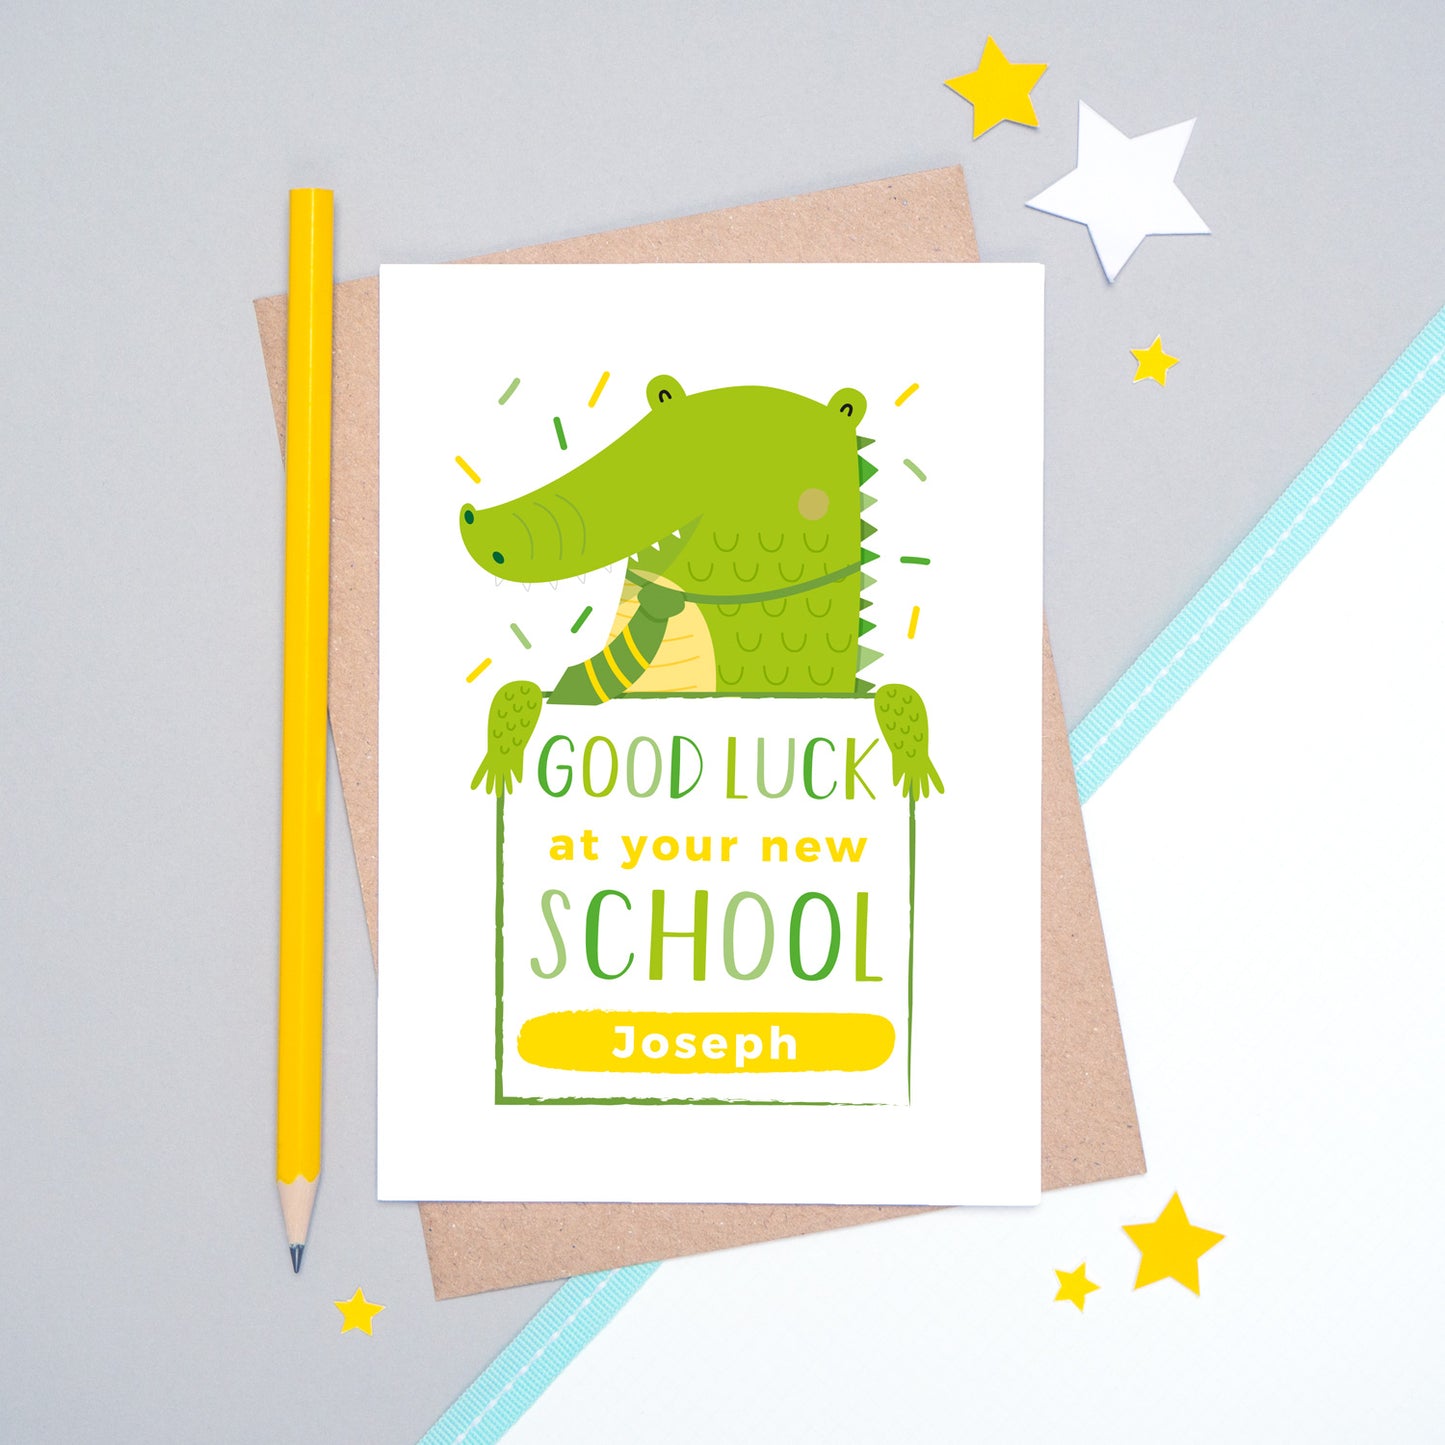 A good luck at your new school personalised card featuring a green friendly crocodile sat on a grey and white background.